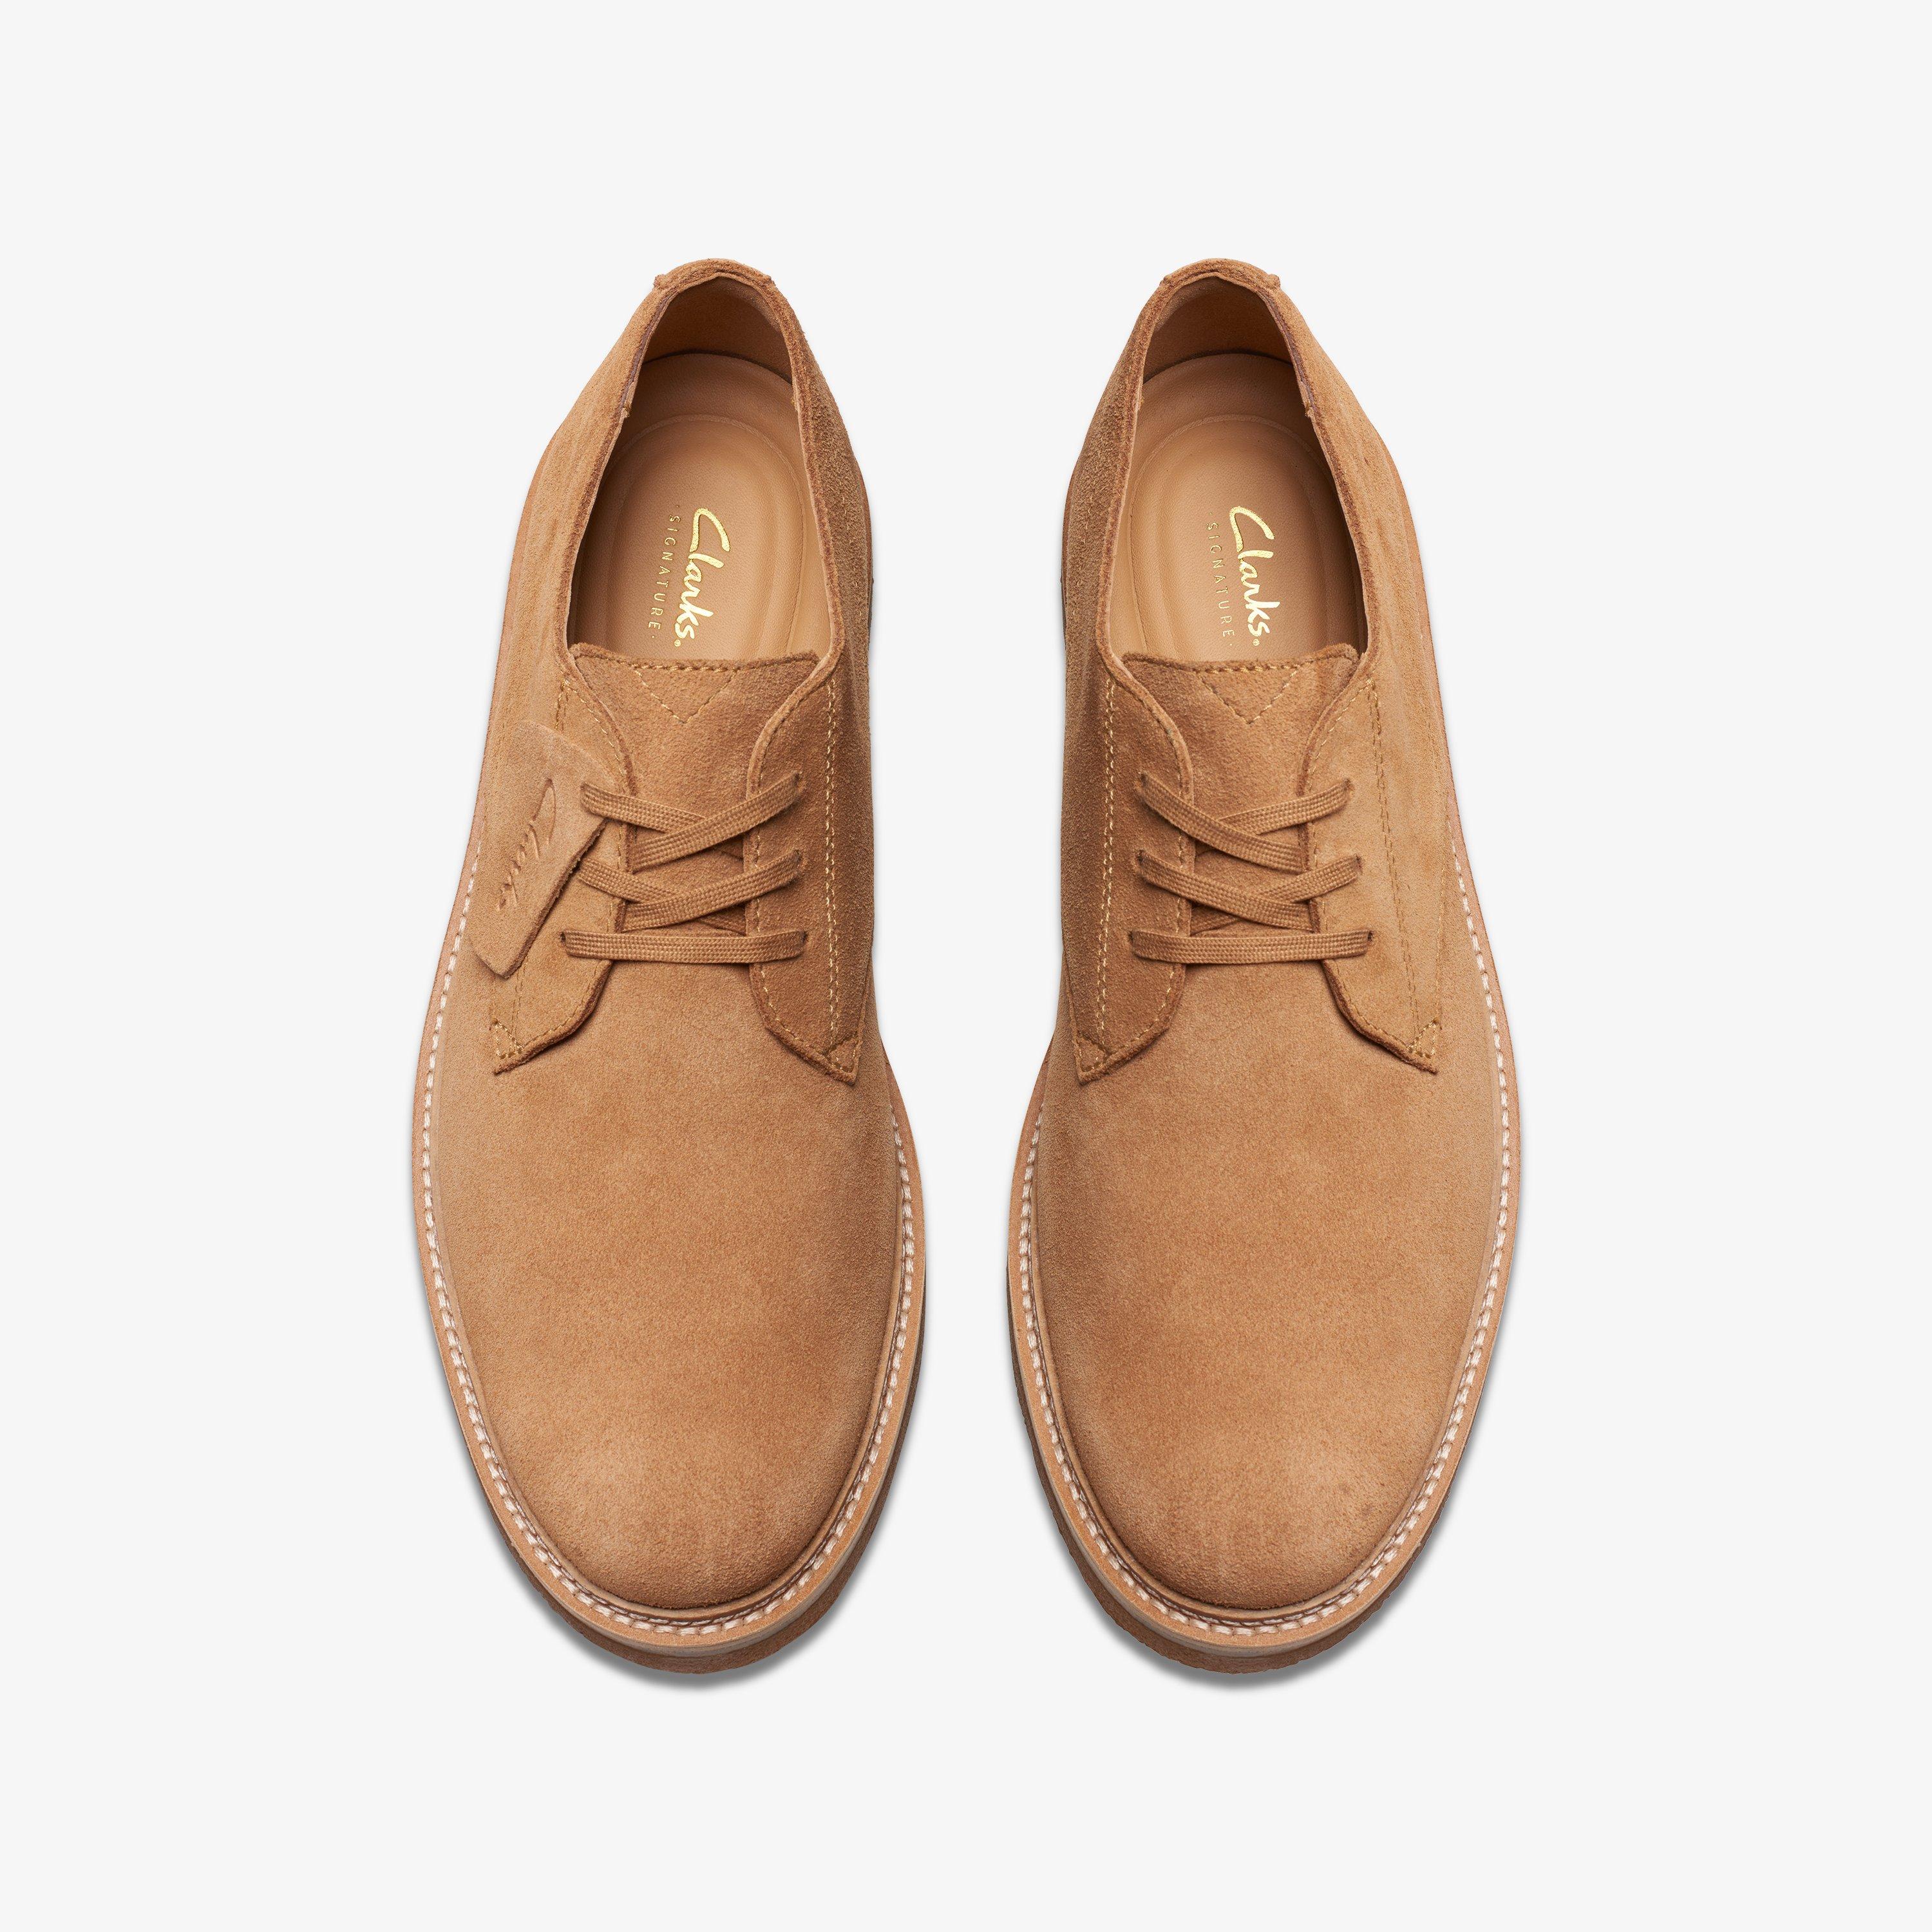 Men's Brown & Tan Shoes - Brown Leather & Suede